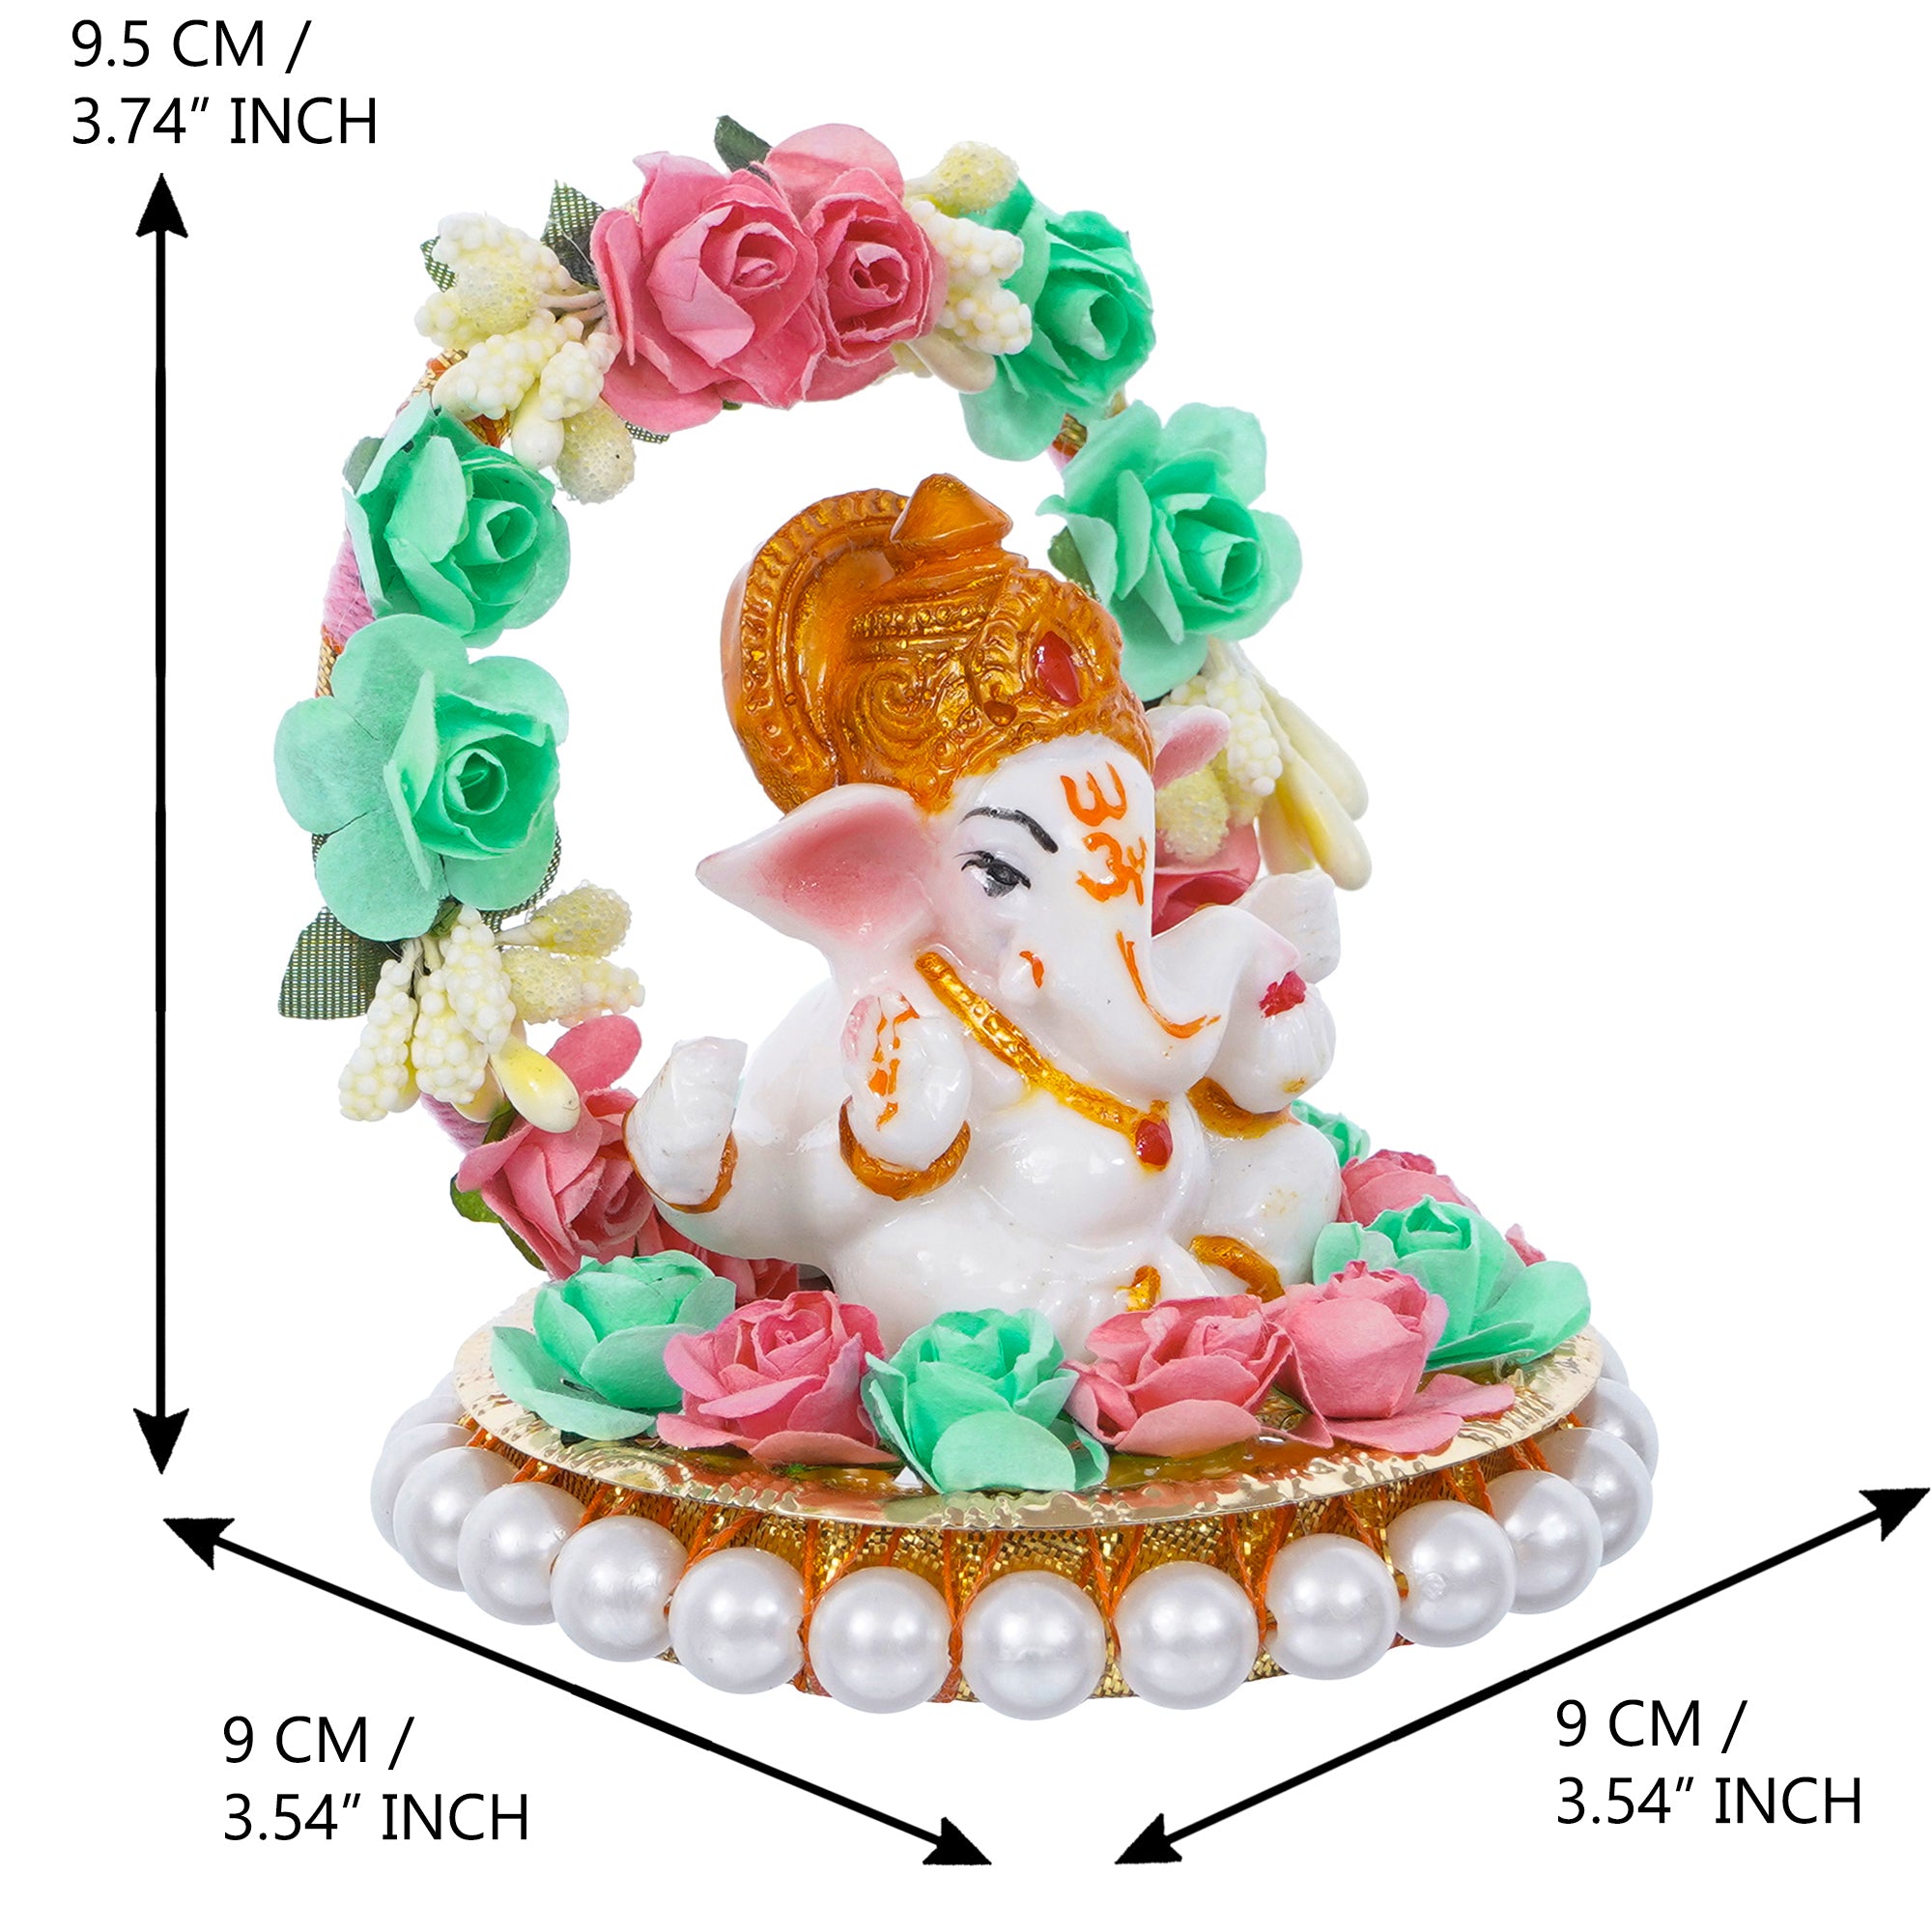 Lord Ganesha Idol On Decorative Handicrafted Plate With Throne Of Pink And Green Flowers 3